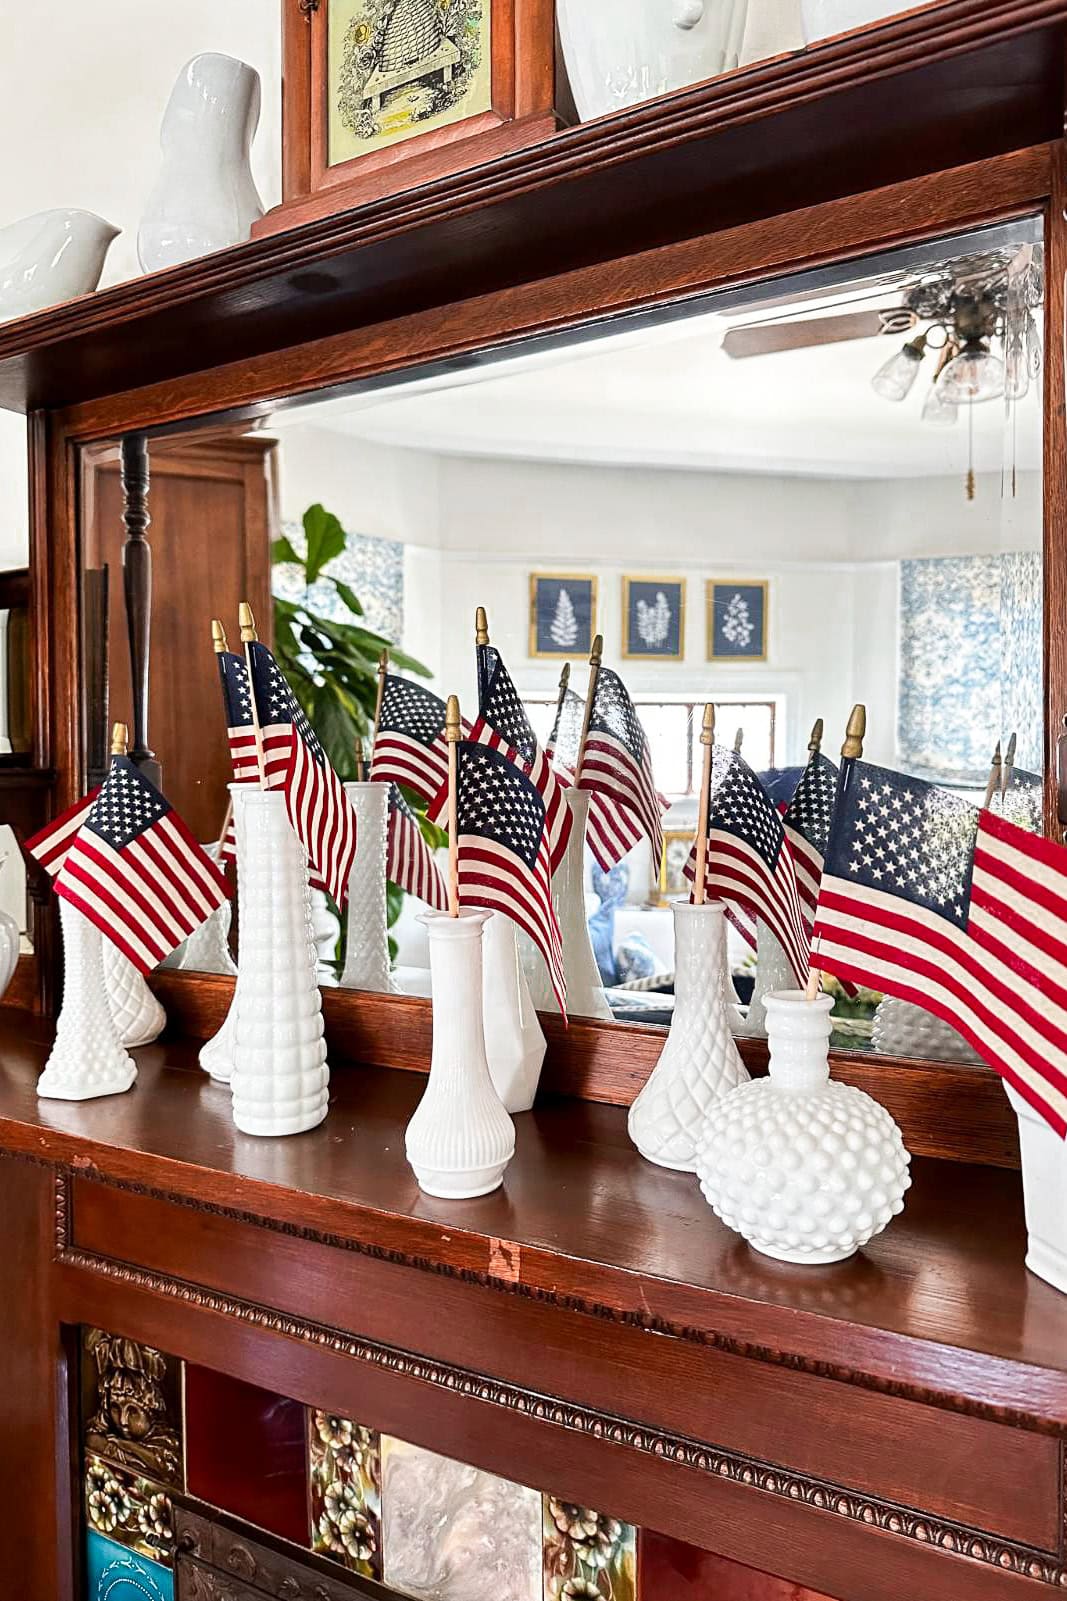 Decorating the fireplace mantel with American Flags displayed in a collection of milk glass vases